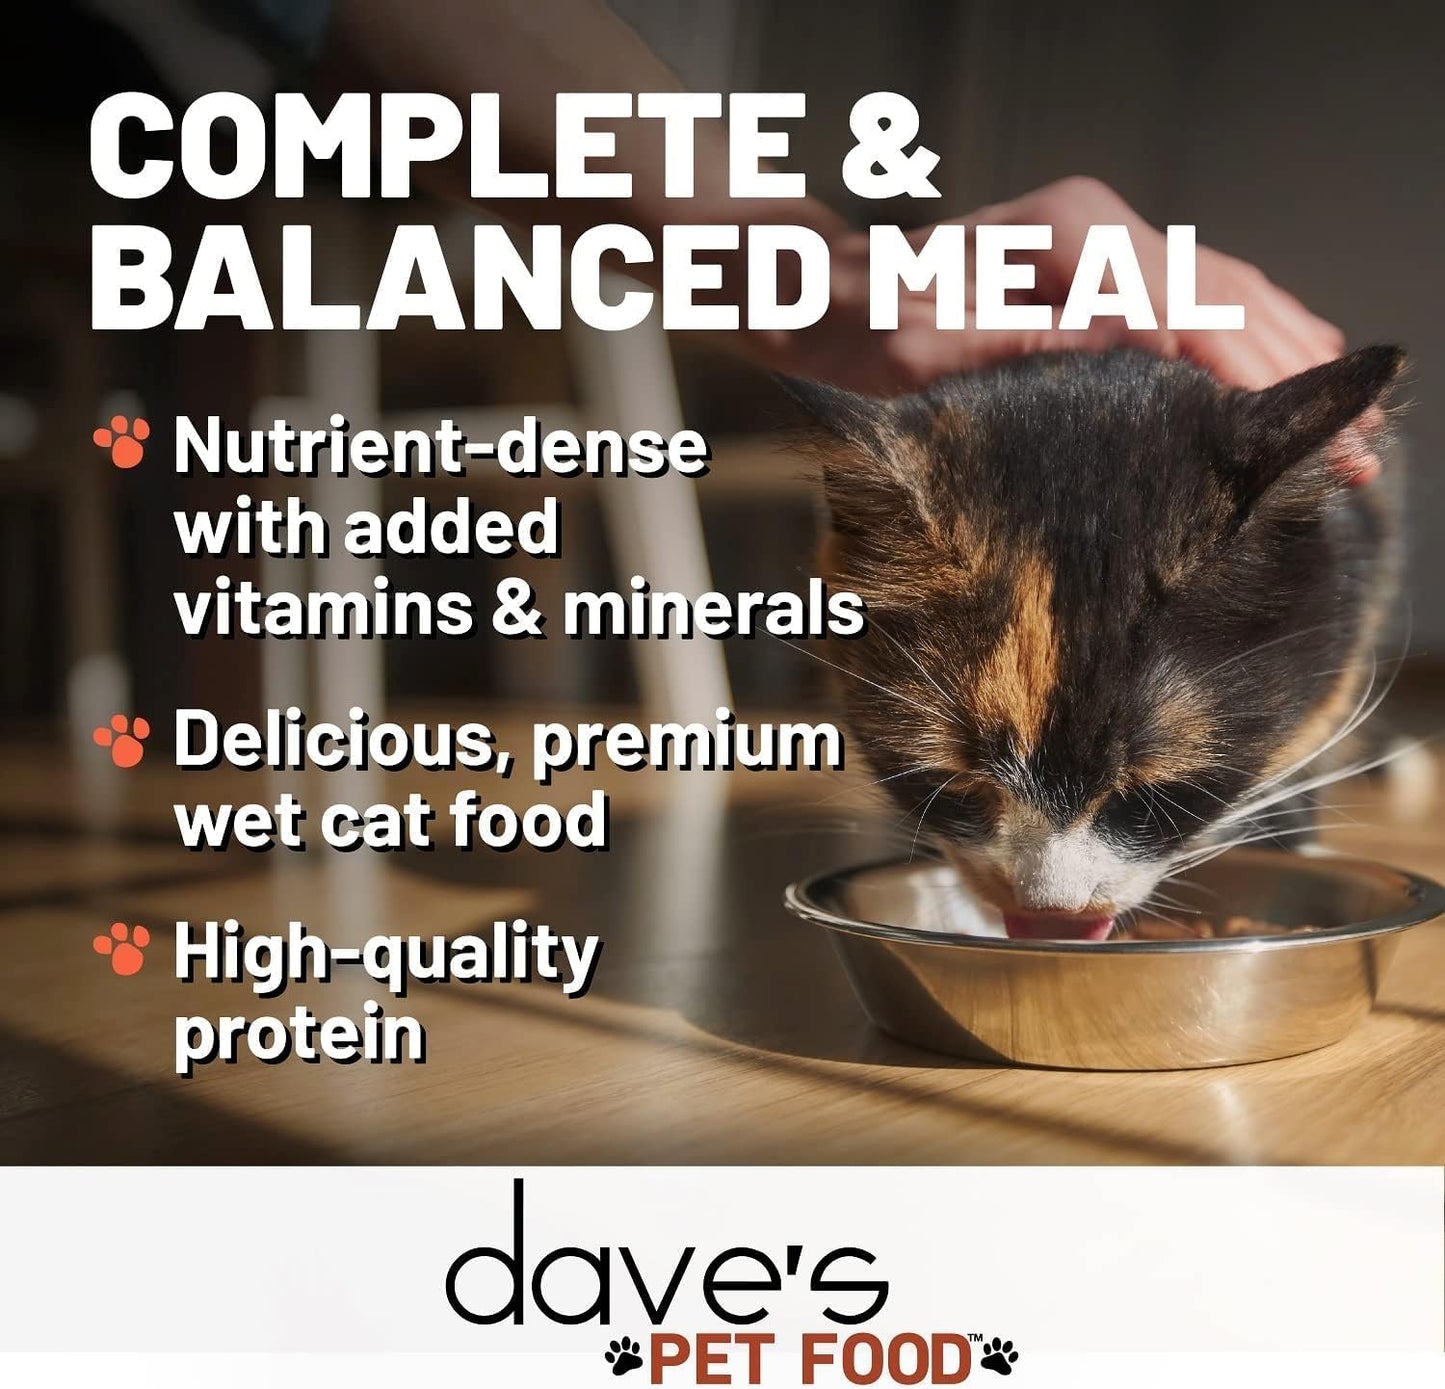 Dave's Pet Food Naturally Healthy Grain-Free Chicken & Whitefish Dinner 5.5-oz, Case Of 24, Wet Cat Food